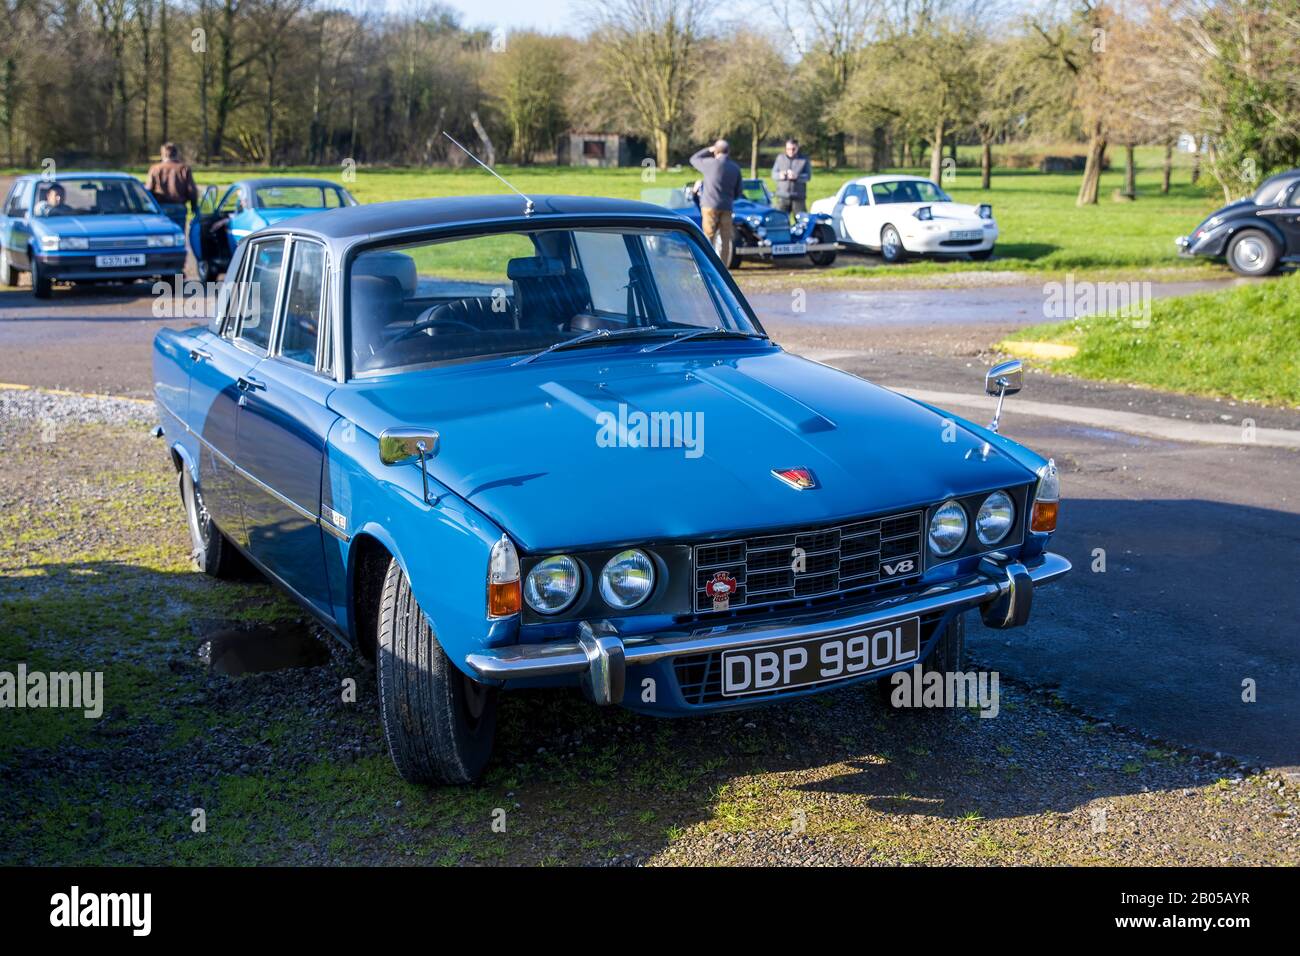 Rover 3500 P6 V8 S, 1973, Reg No: DPB 990L, at The Great Western Classic Car Show, Shepton Mallet UK, Febuary 08, 2020 Stock Photo